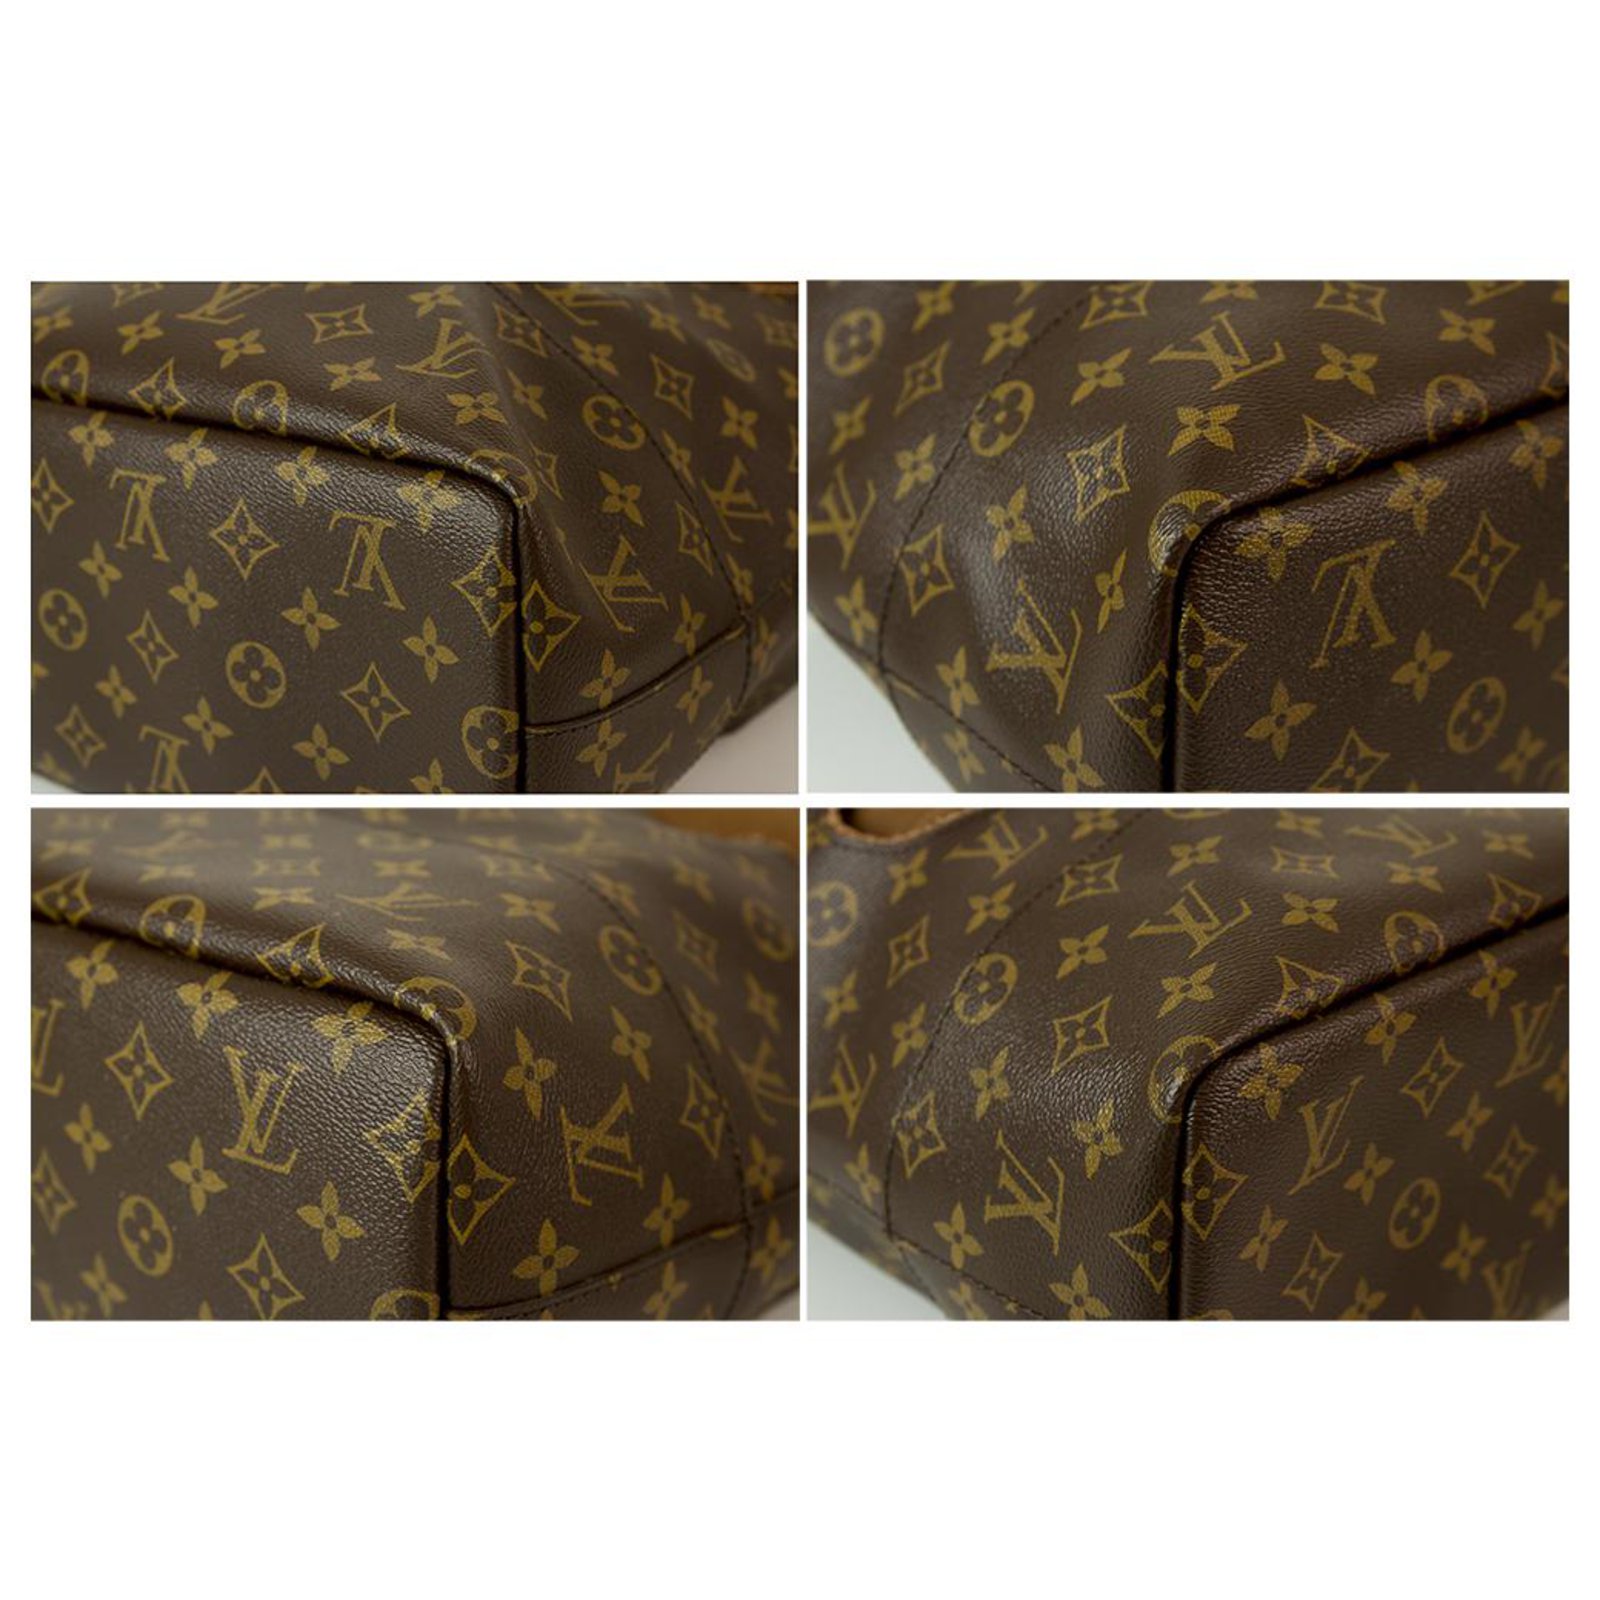 Limited Edition Louis Vuitton x Rei Kawakubo Iconoclasts Monogram Bag With  Holes ultra RARE in mint condition!!! Brown Cloth ref.147578 - Joli Closet